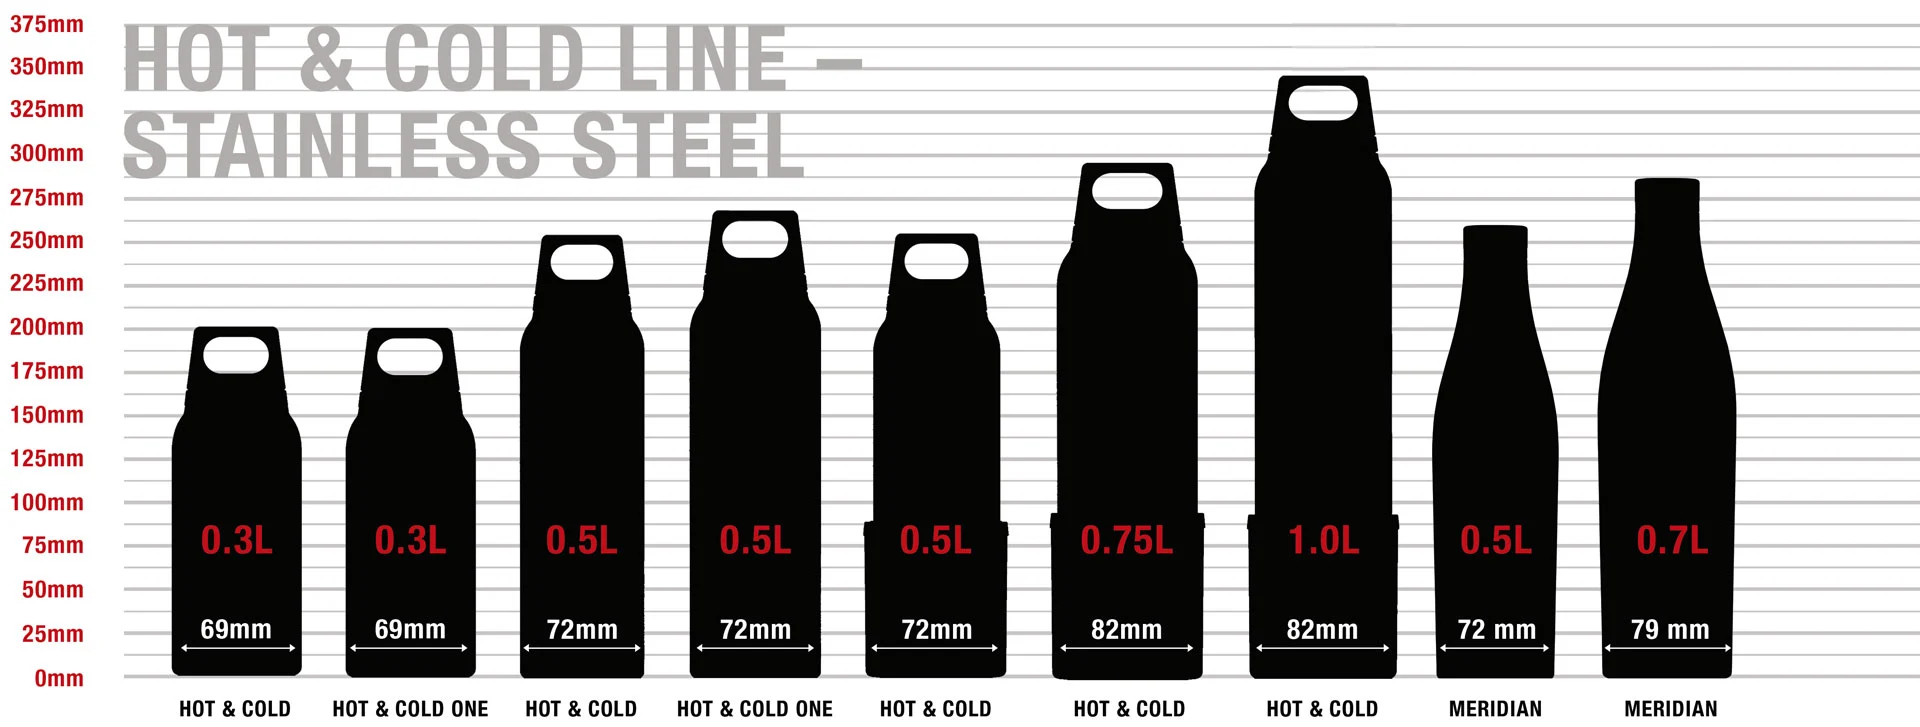 SIGG Stainless Steel Dimensions